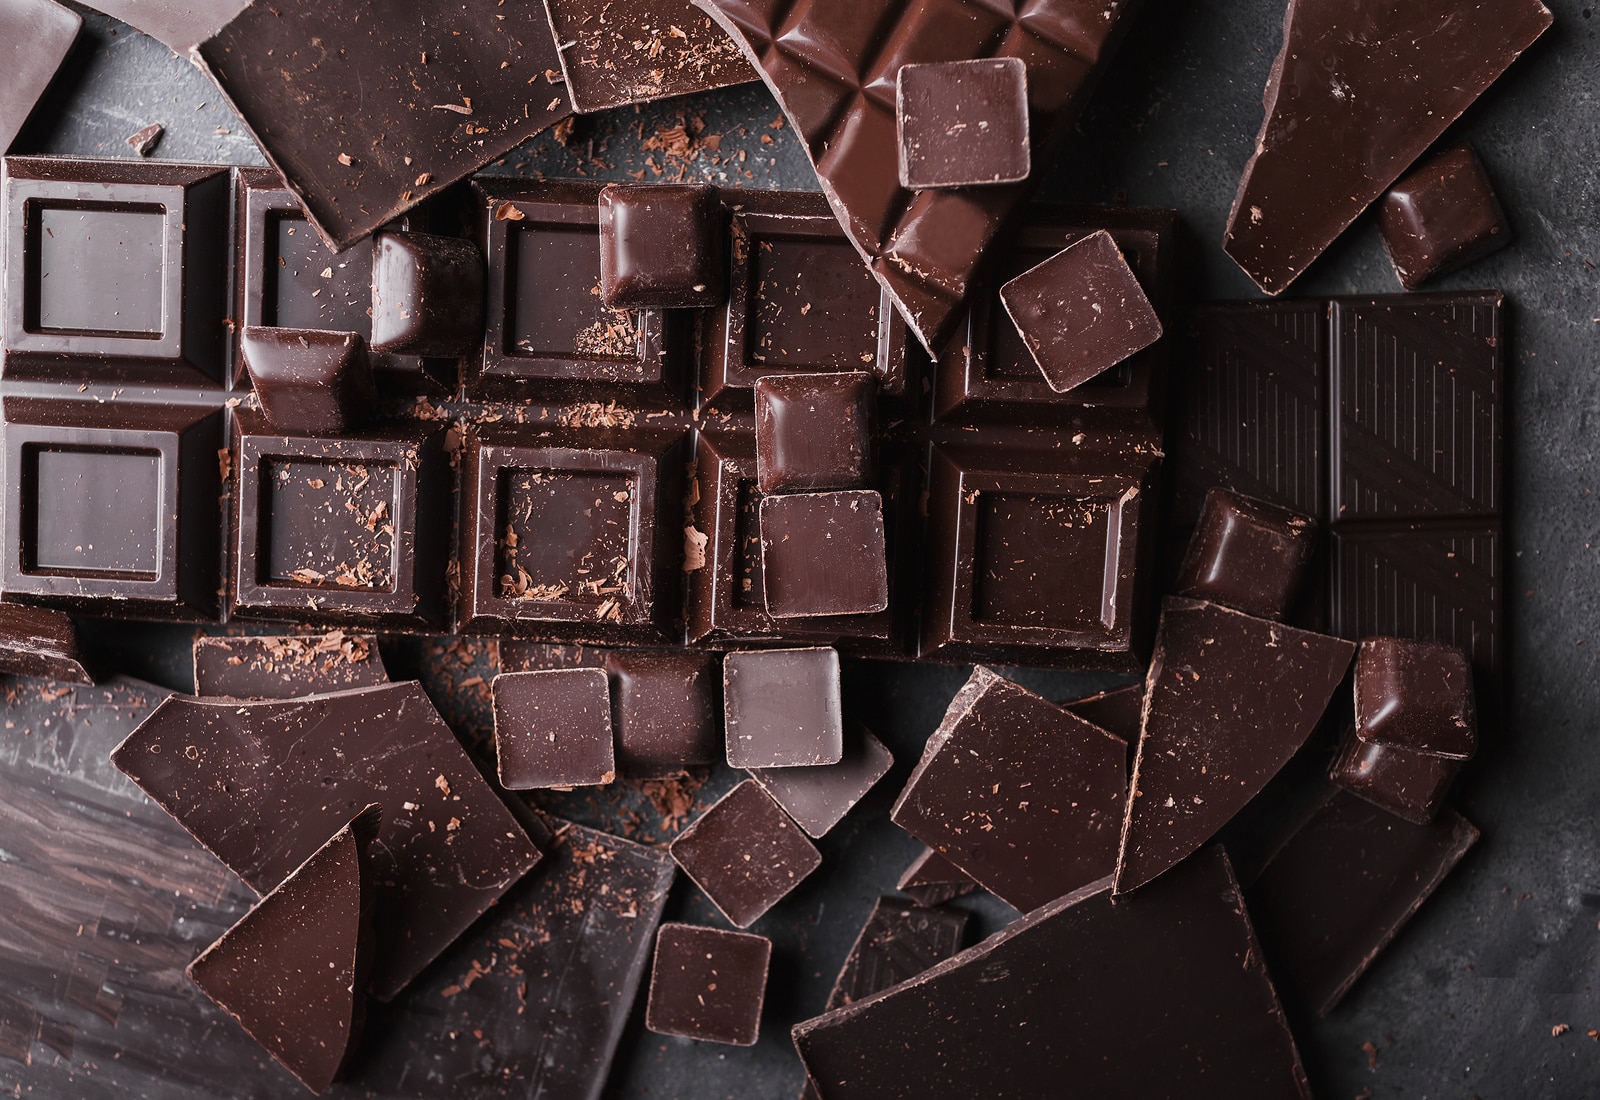 Healthy or Harmful? The Health Benefits of Chocolate